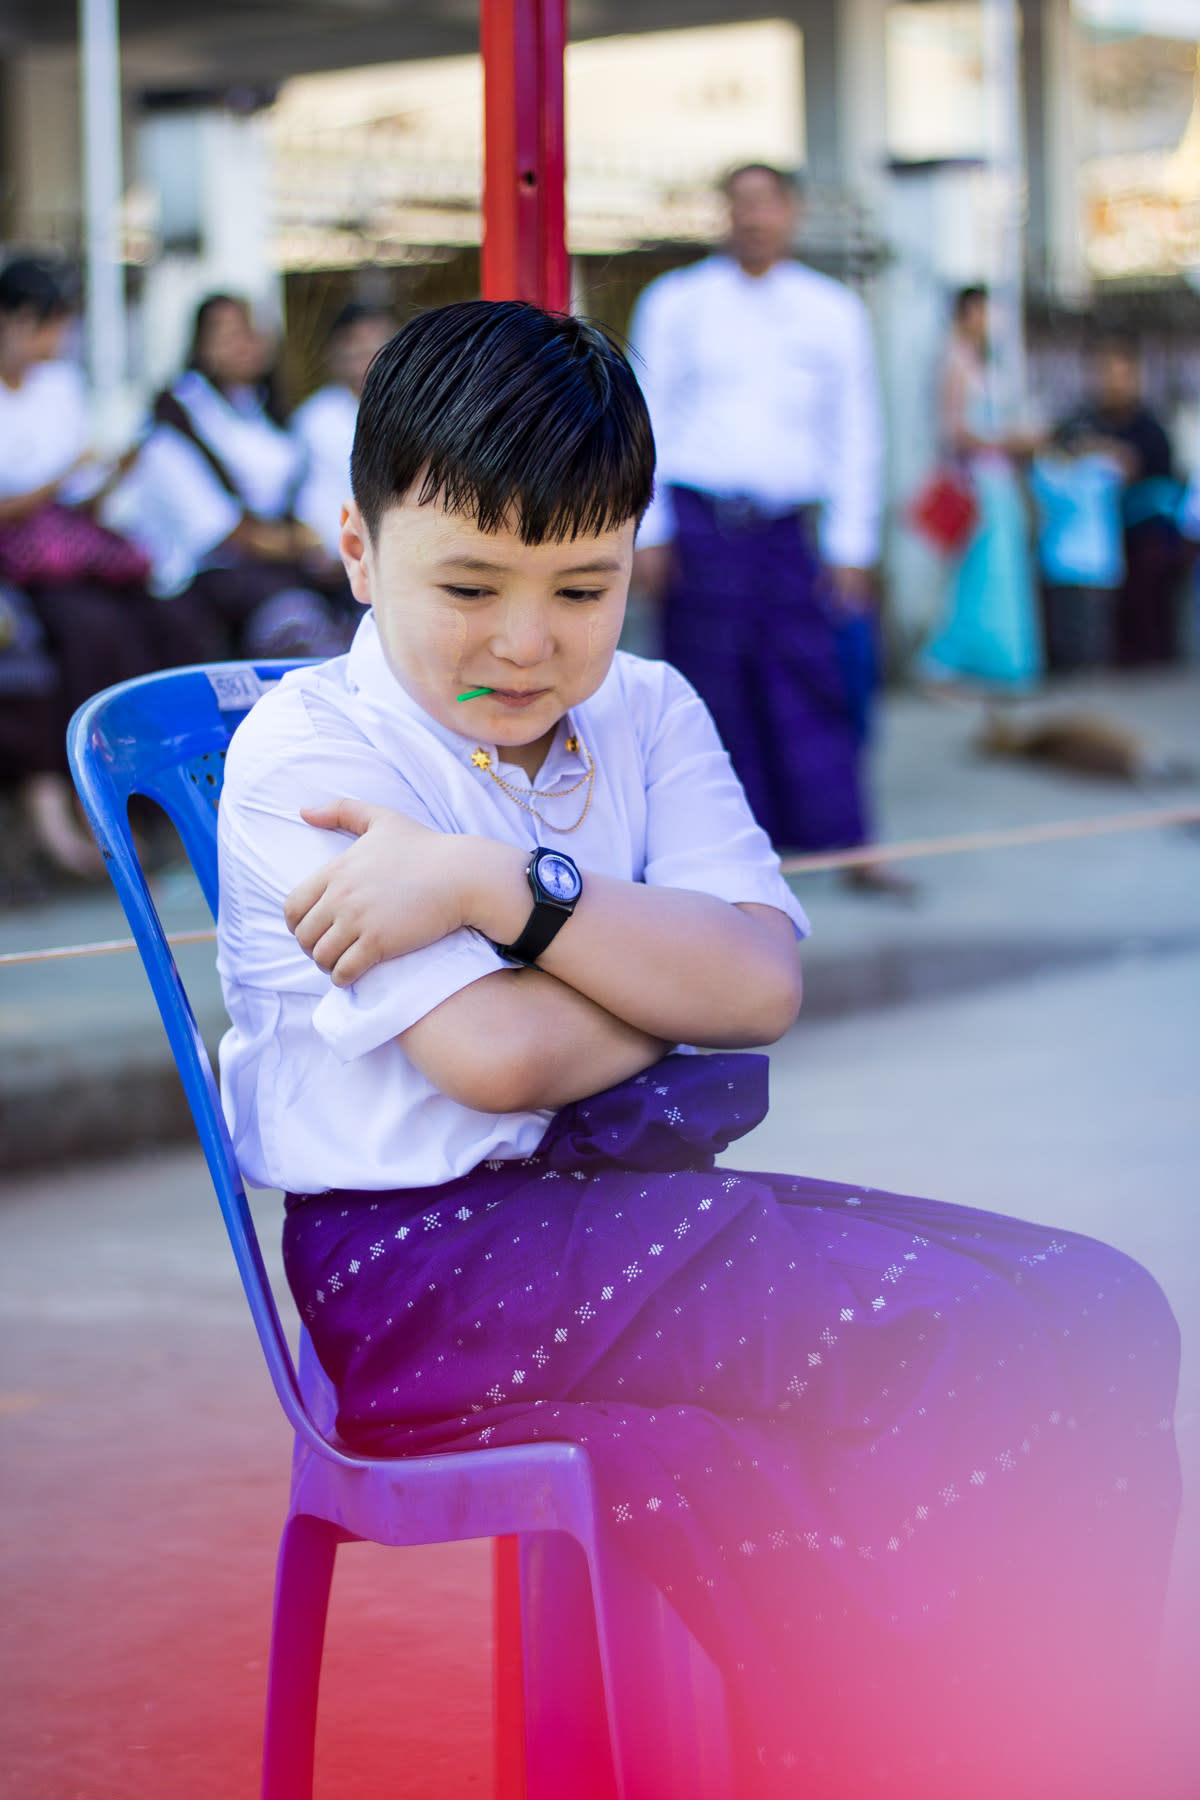 A child sitting on a blue chair with arms crossed